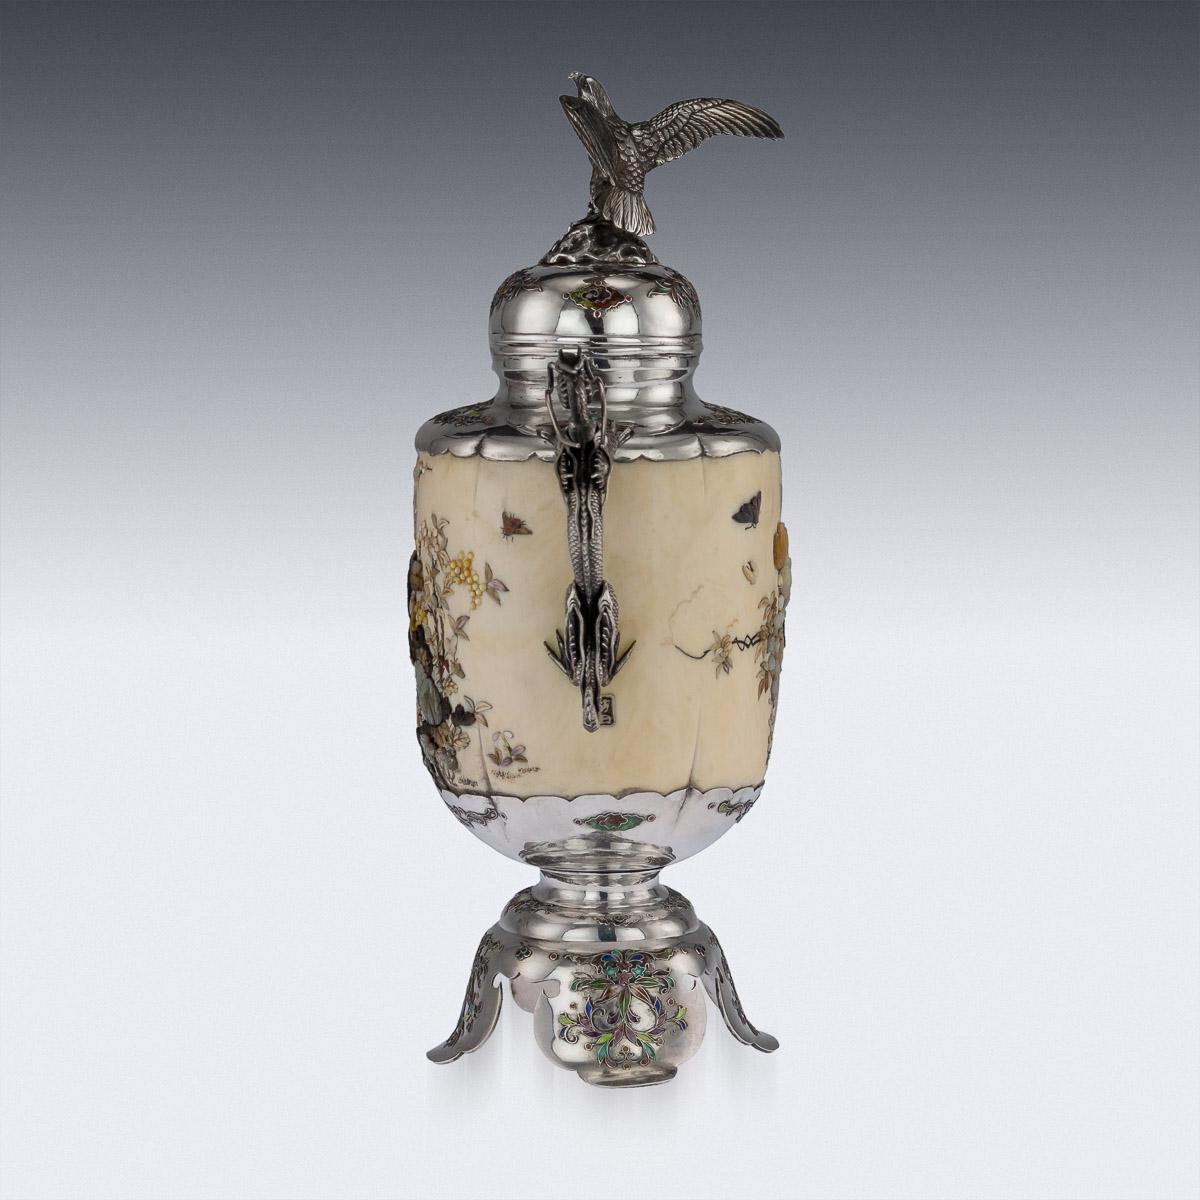 Antique late 19th century Japanese Meiji period Shibayama Koro (Incense Burner). The silver body is applied of very fine enamel work, sides applied with two realistically modelled dragon handles, adorned with a finely carved panels of various colors